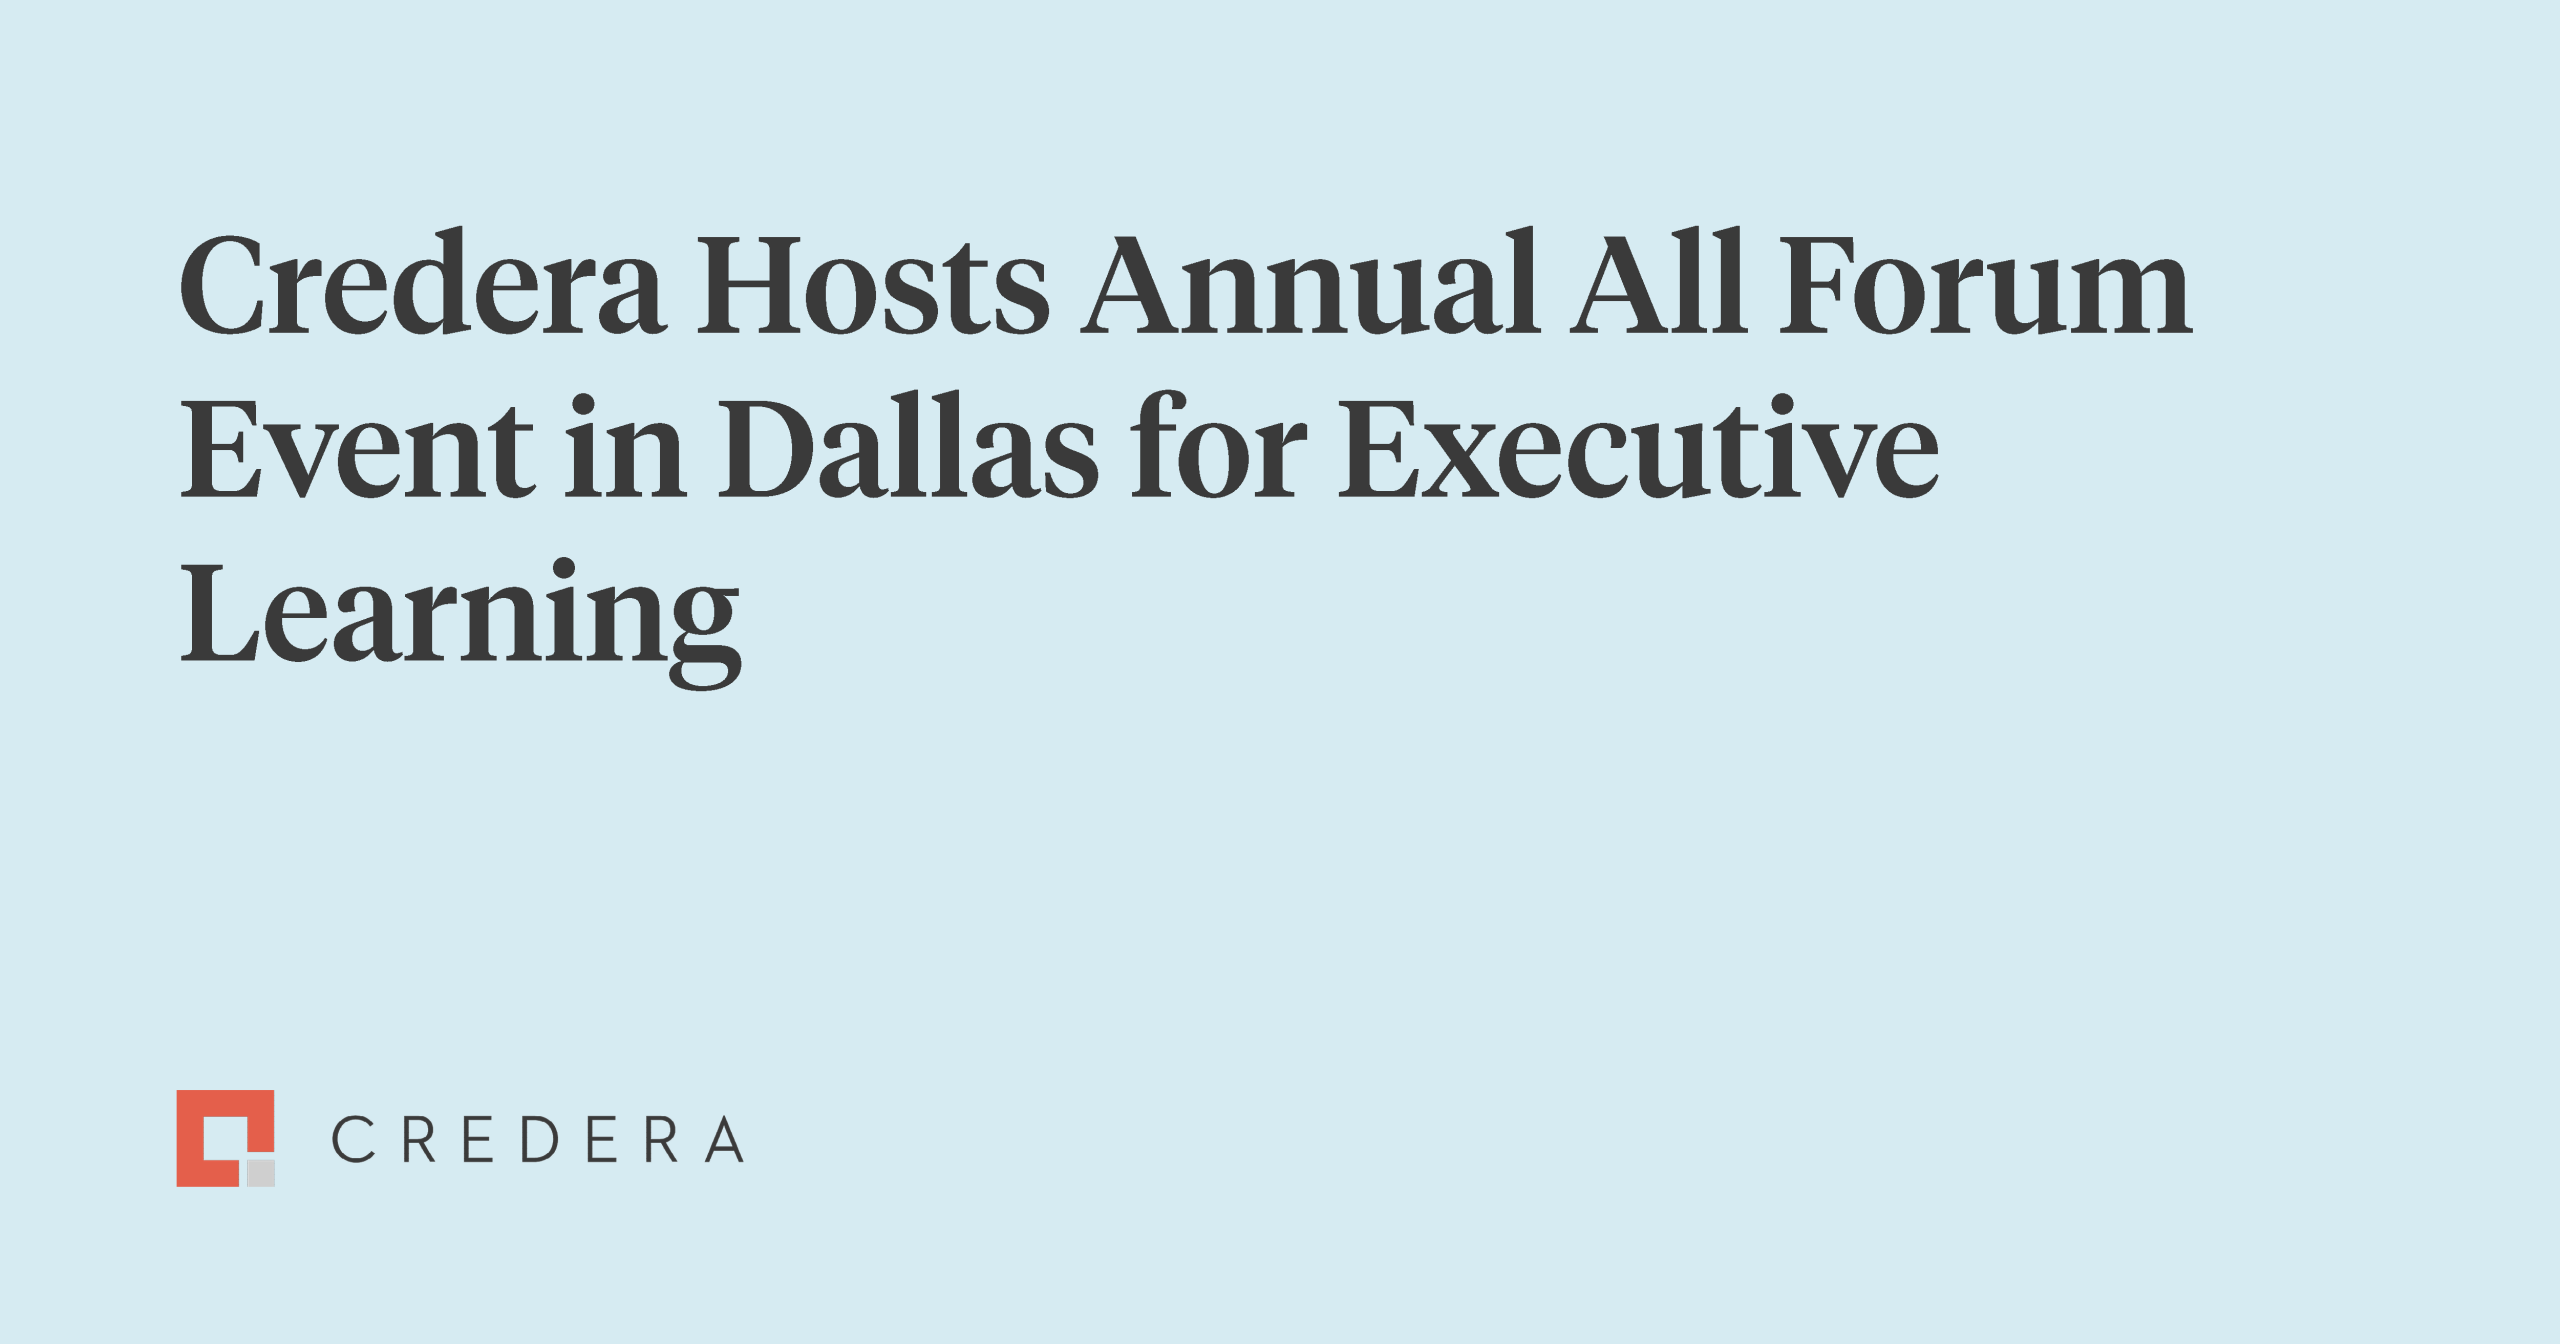 Credera Hosts Annual All Forum Event at the Ritz Carlton Dallas for Executive Peer Learning